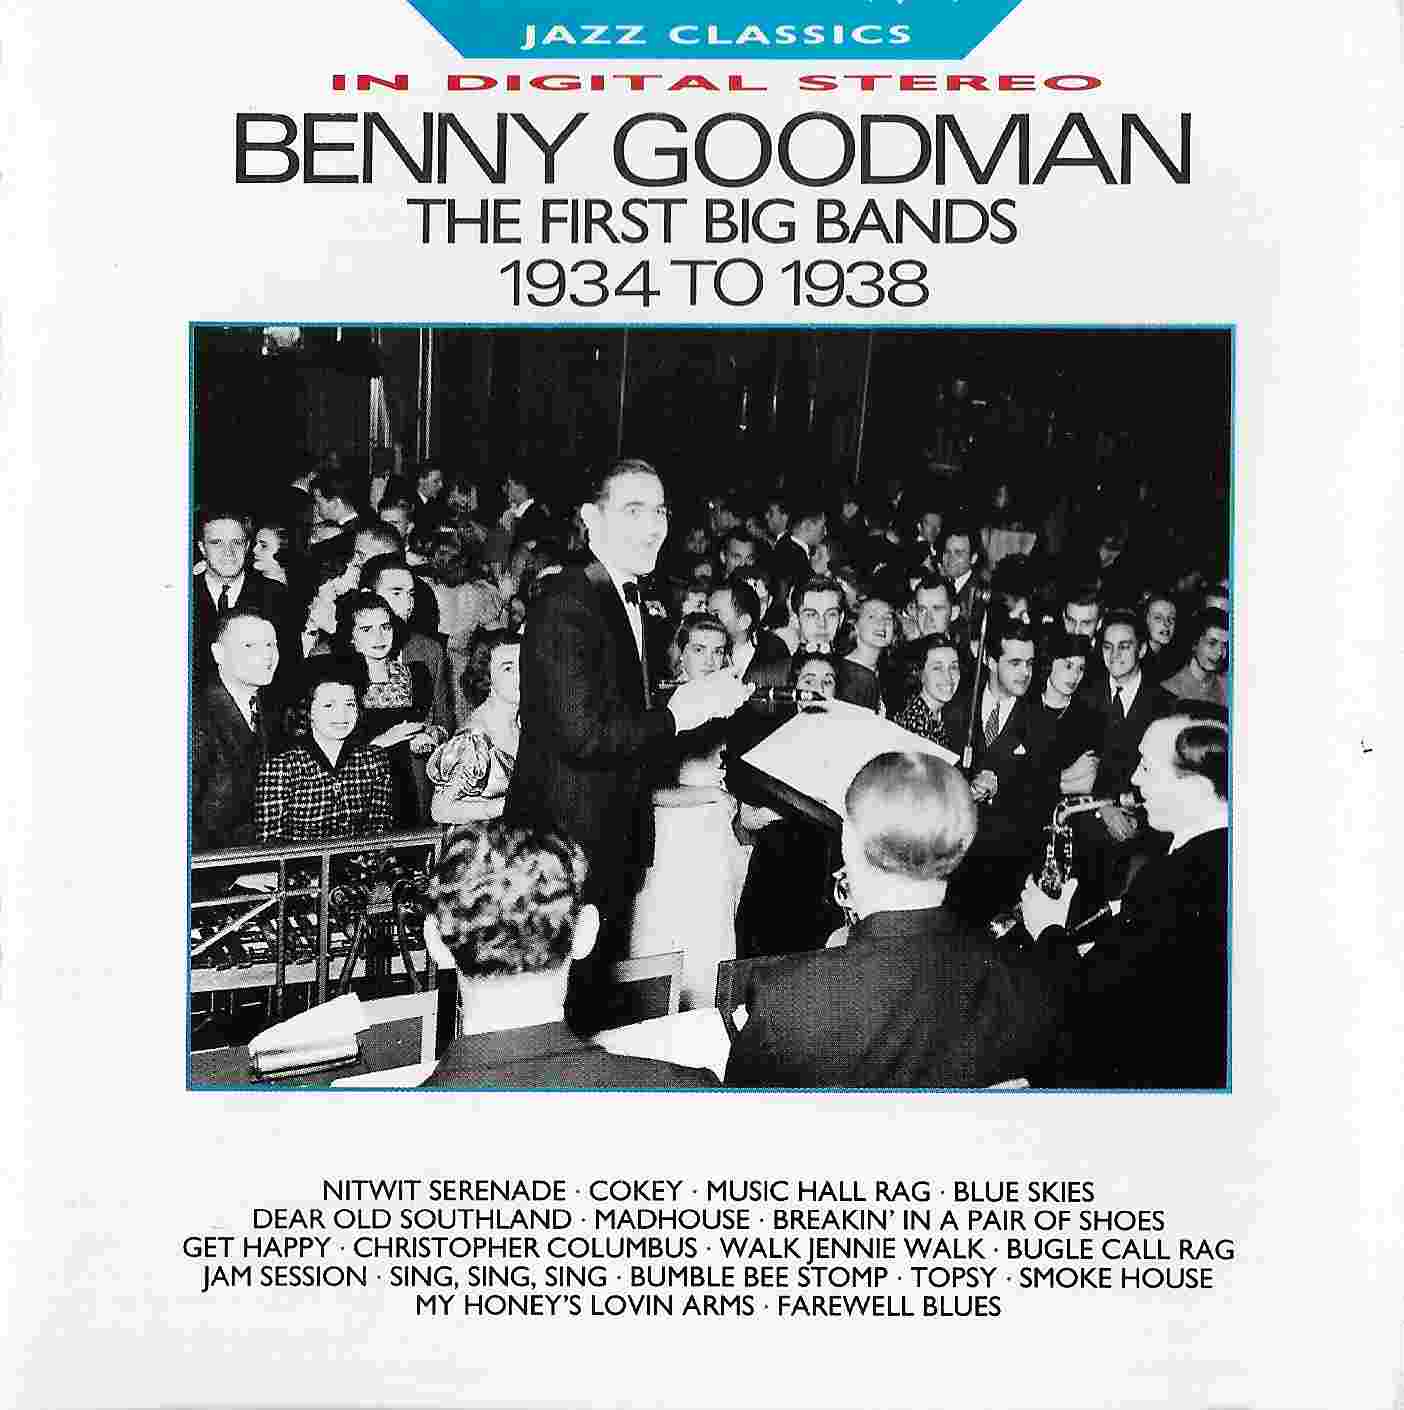 Picture of BBCCD759 Jazz classics - Benny Goodman 1934 - 1938 by artist Benny Goodman  from the BBC cds - Records and Tapes library